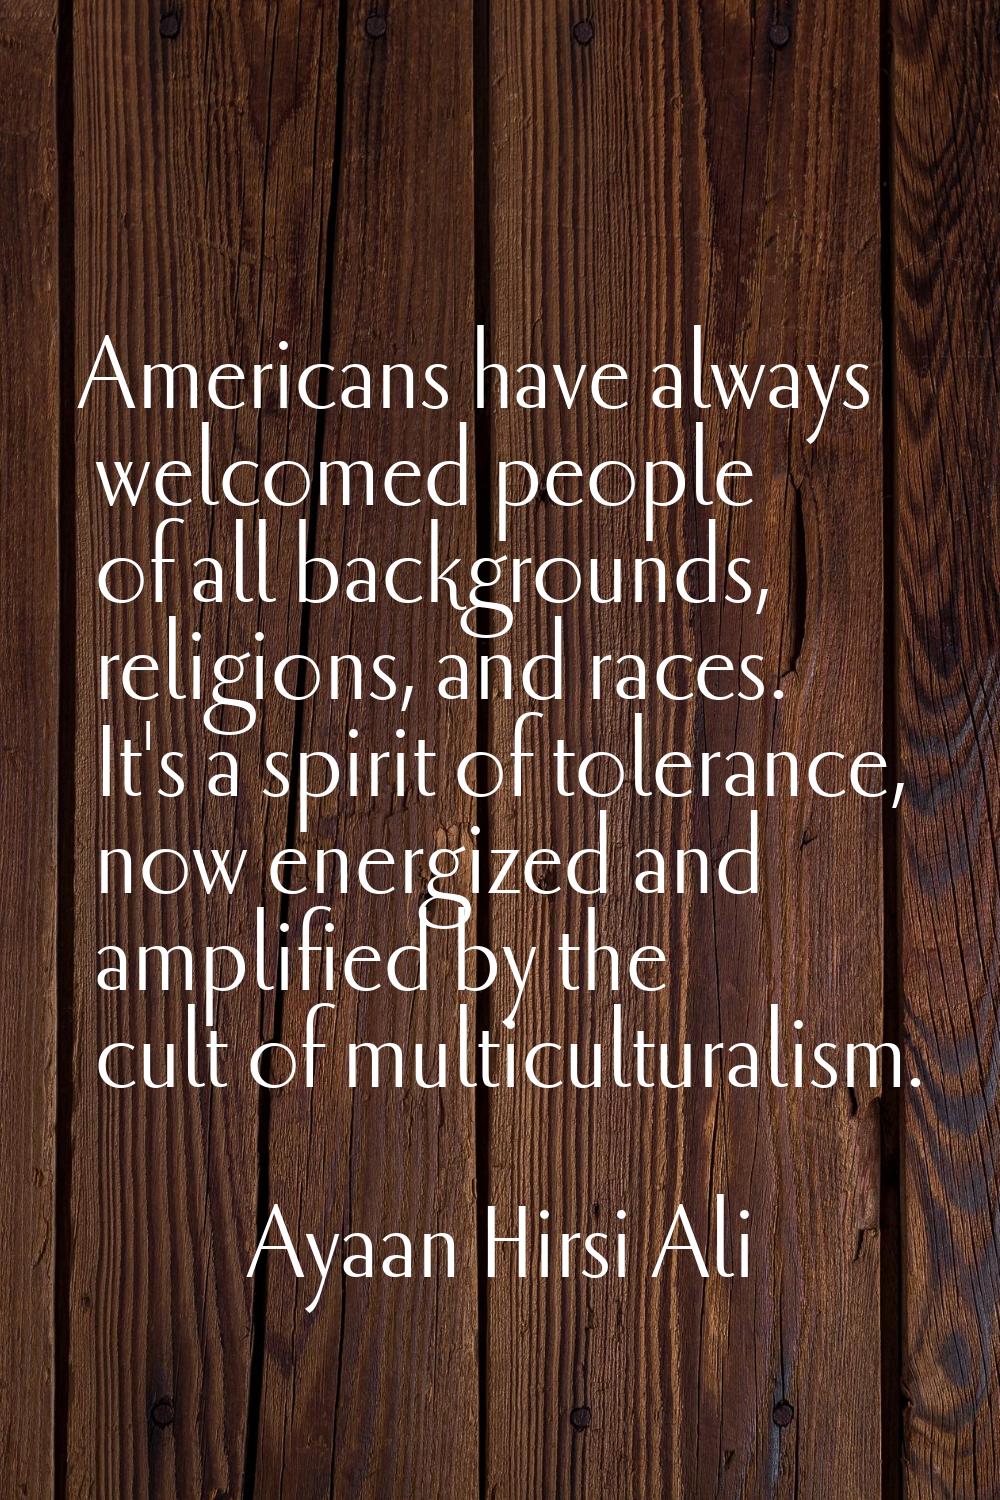 Americans have always welcomed people of all backgrounds, religions, and races. It's a spirit of to